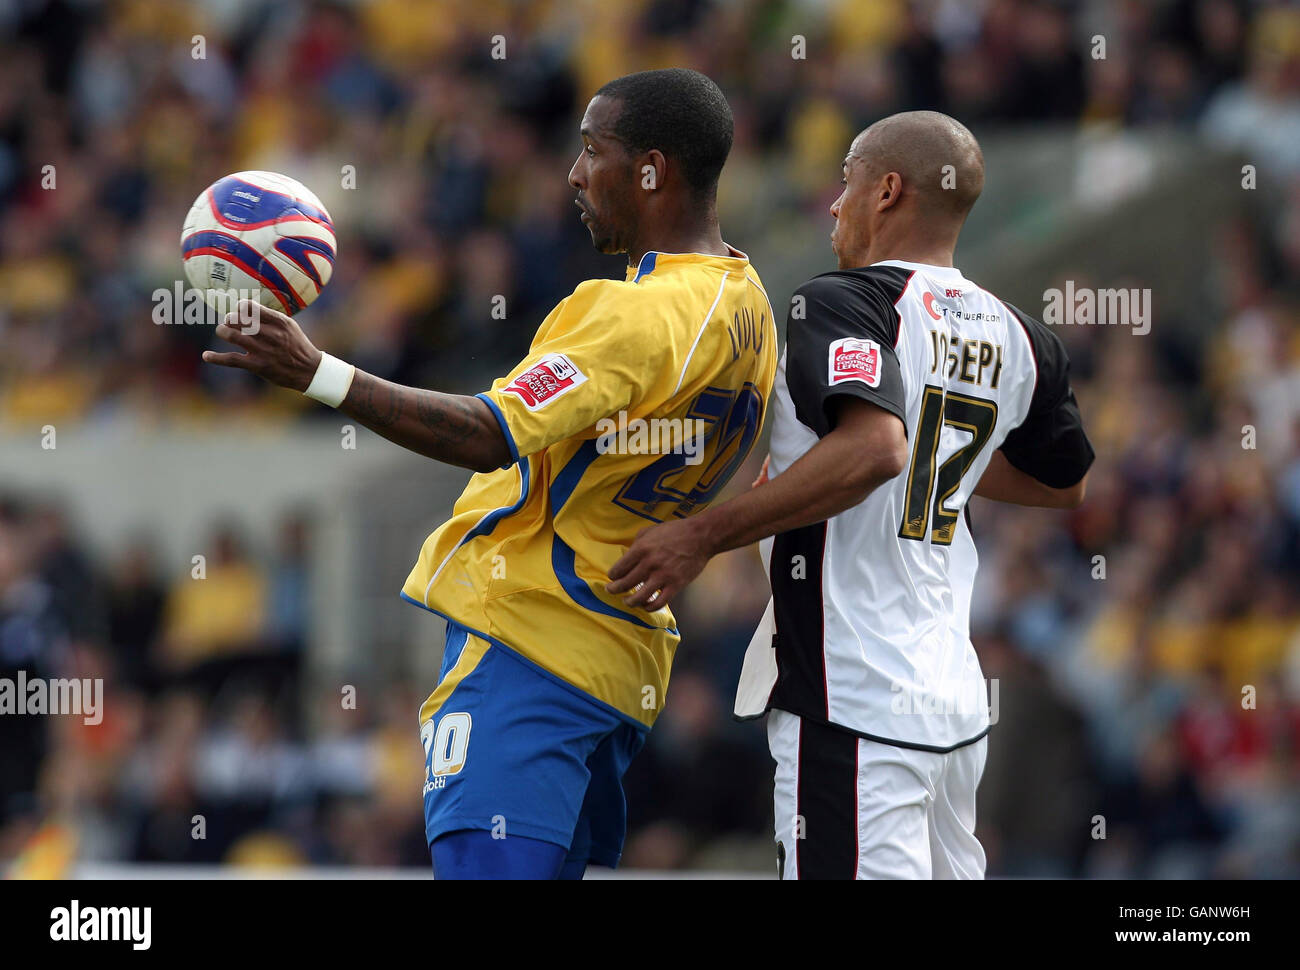 Mansfield Town's Jefferson Louis and Rotherham United's Marc Joseph (right) battles for the ball during the Coca-Cola Football League Two match at Field Mill, Mansfield. Stock Photo